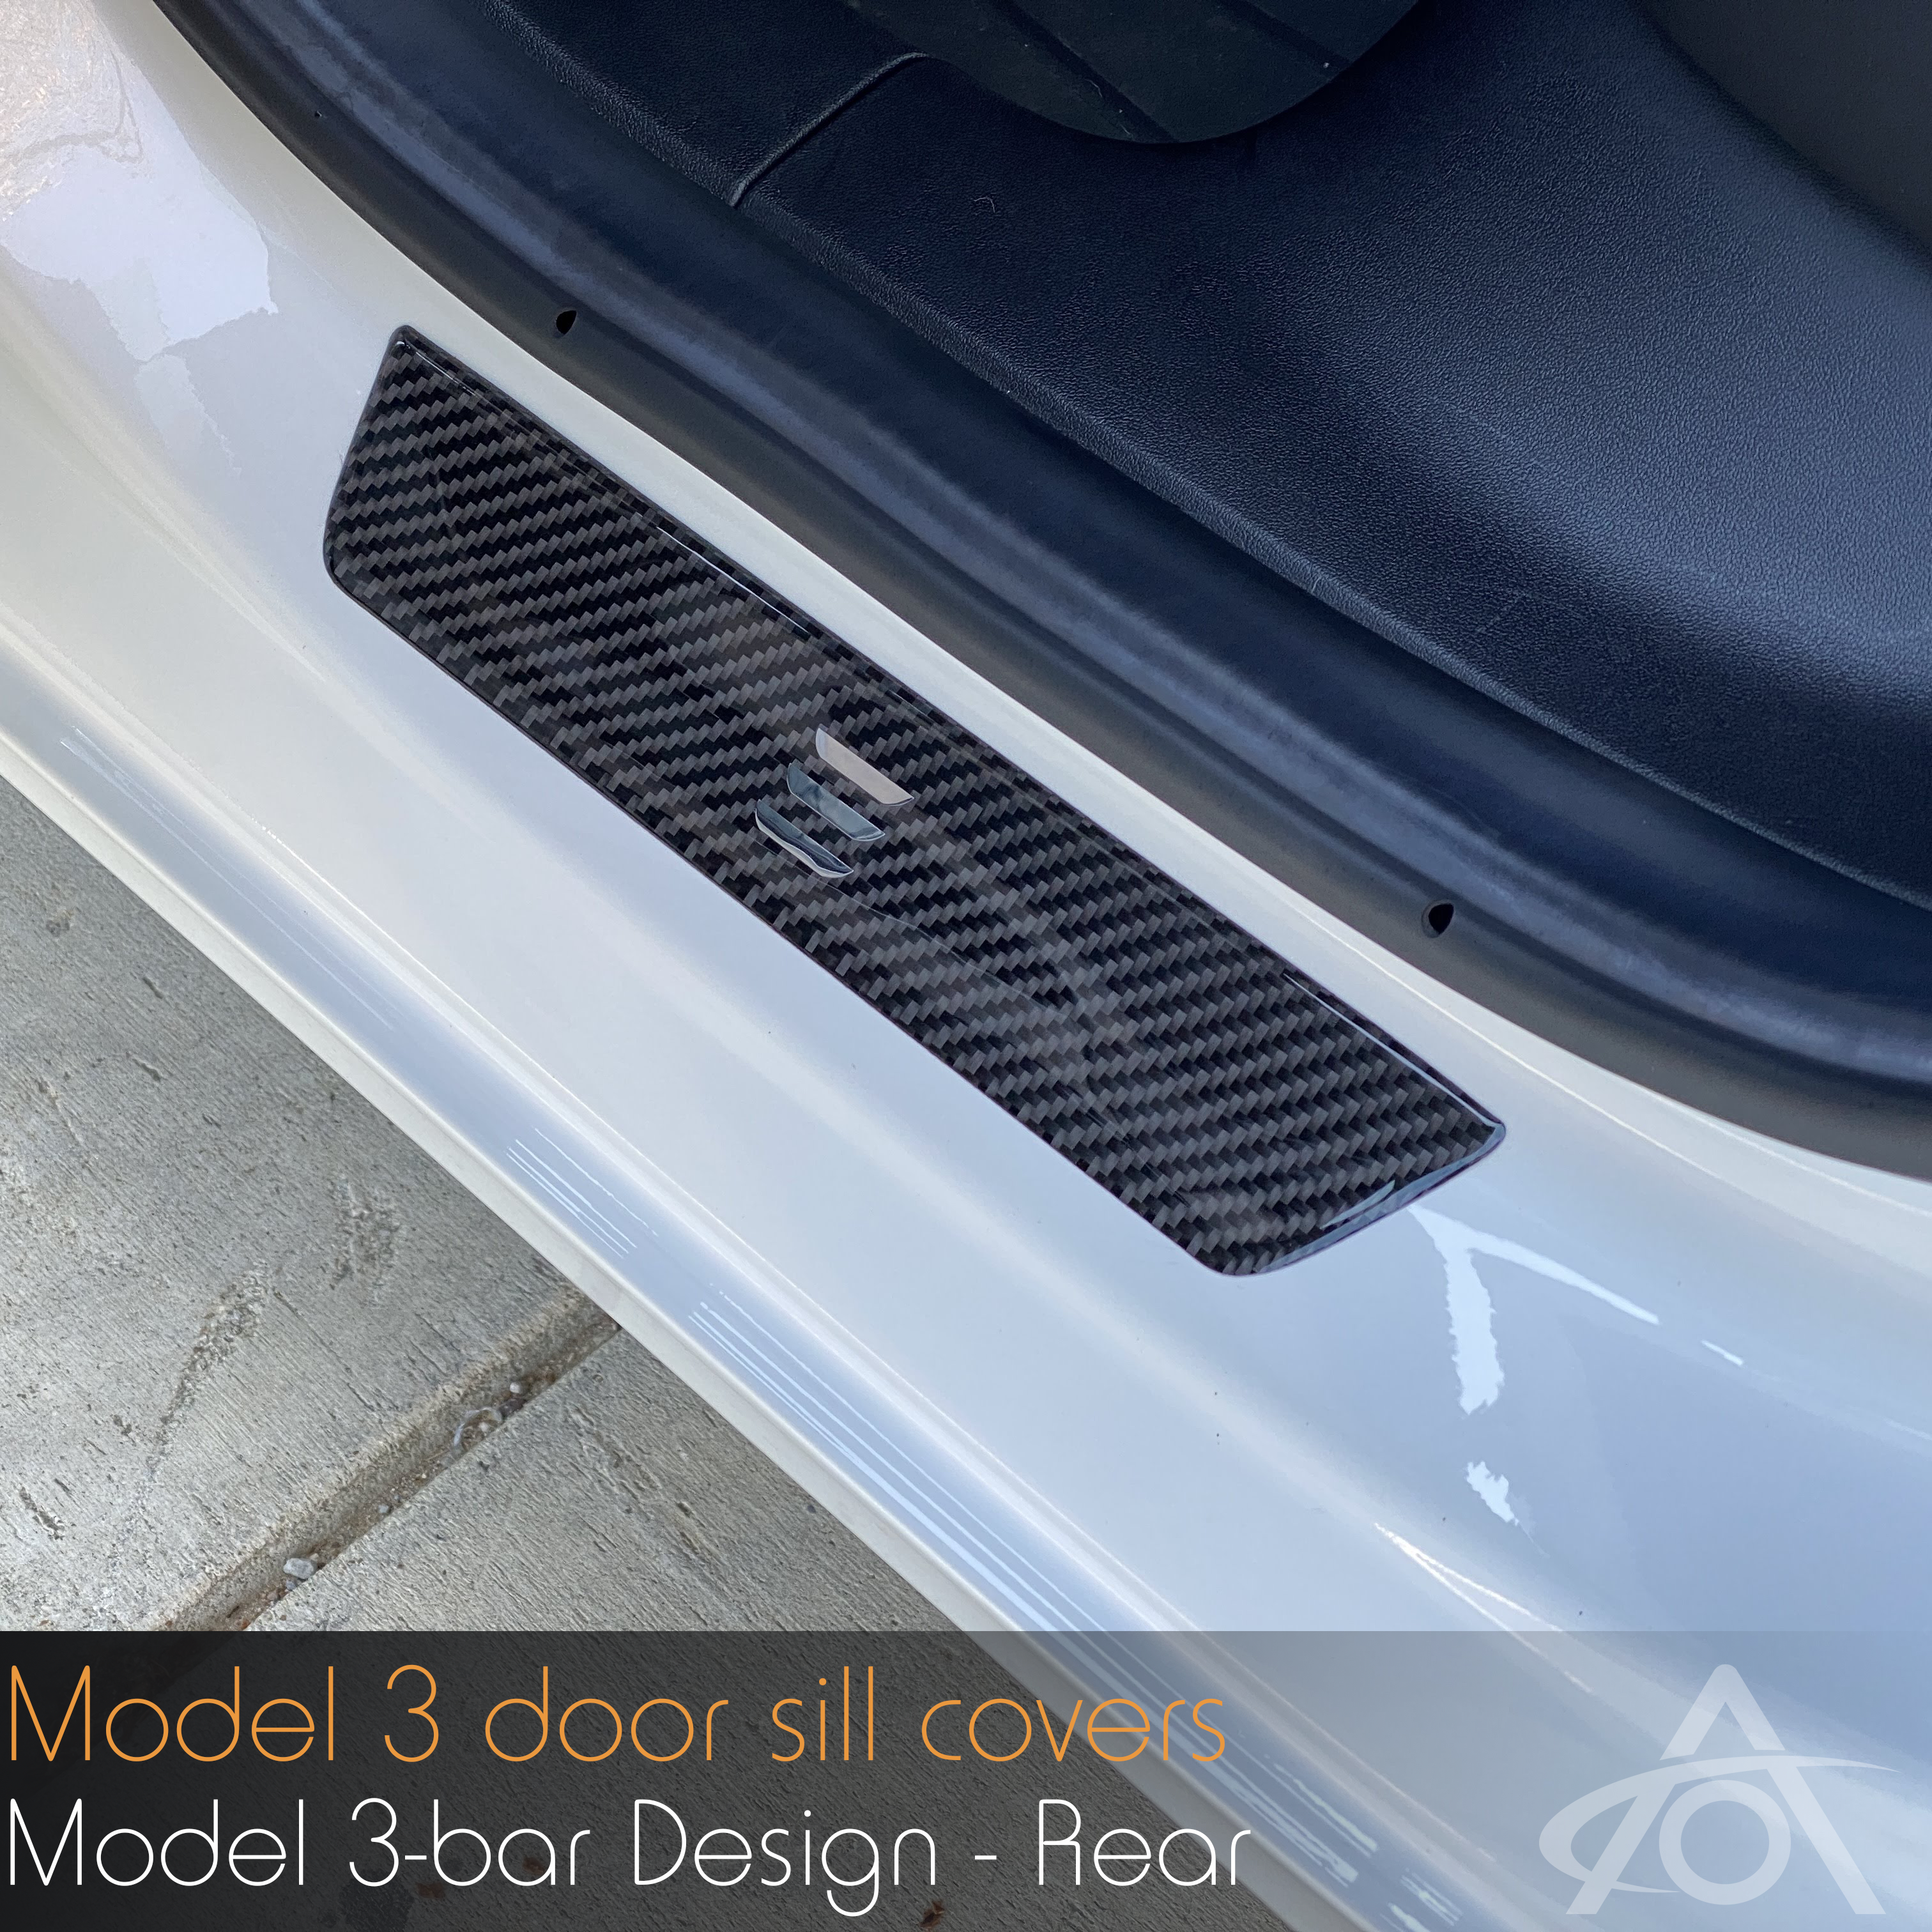 Door Sill Covers for the Tesla Model 3